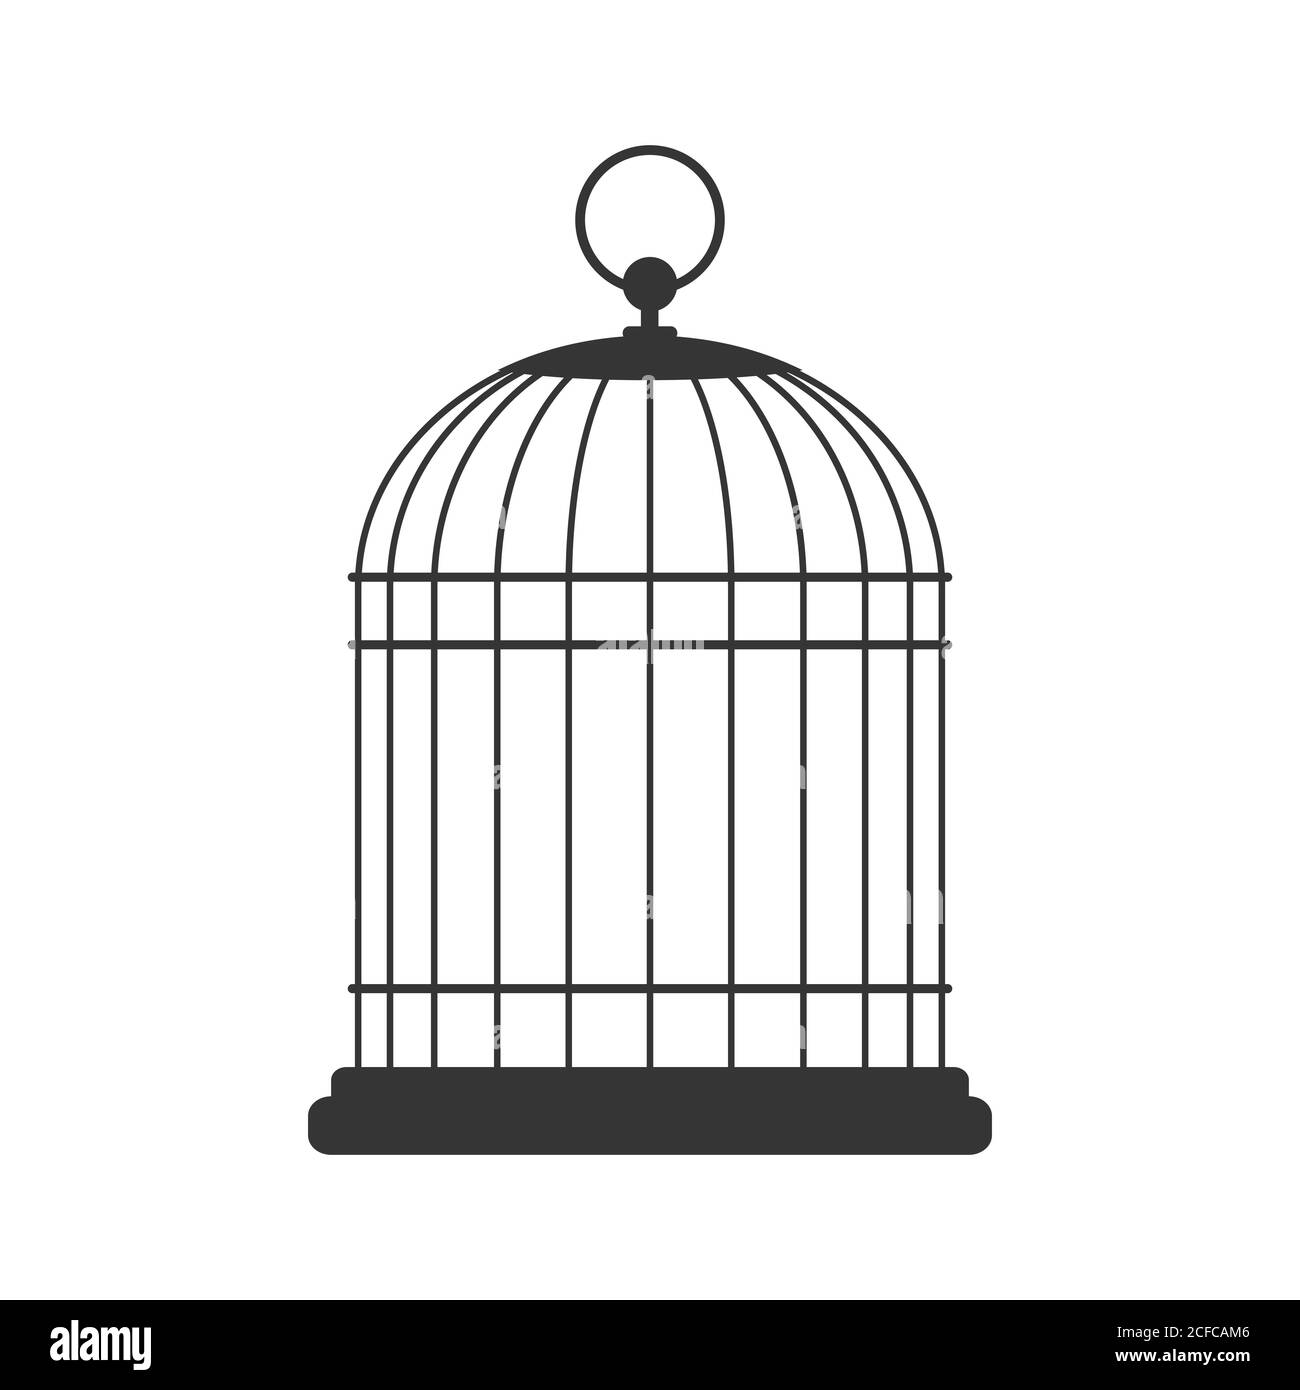 Bird Cage Tattoos Designs Ideas and Meaning  Tattoos For You